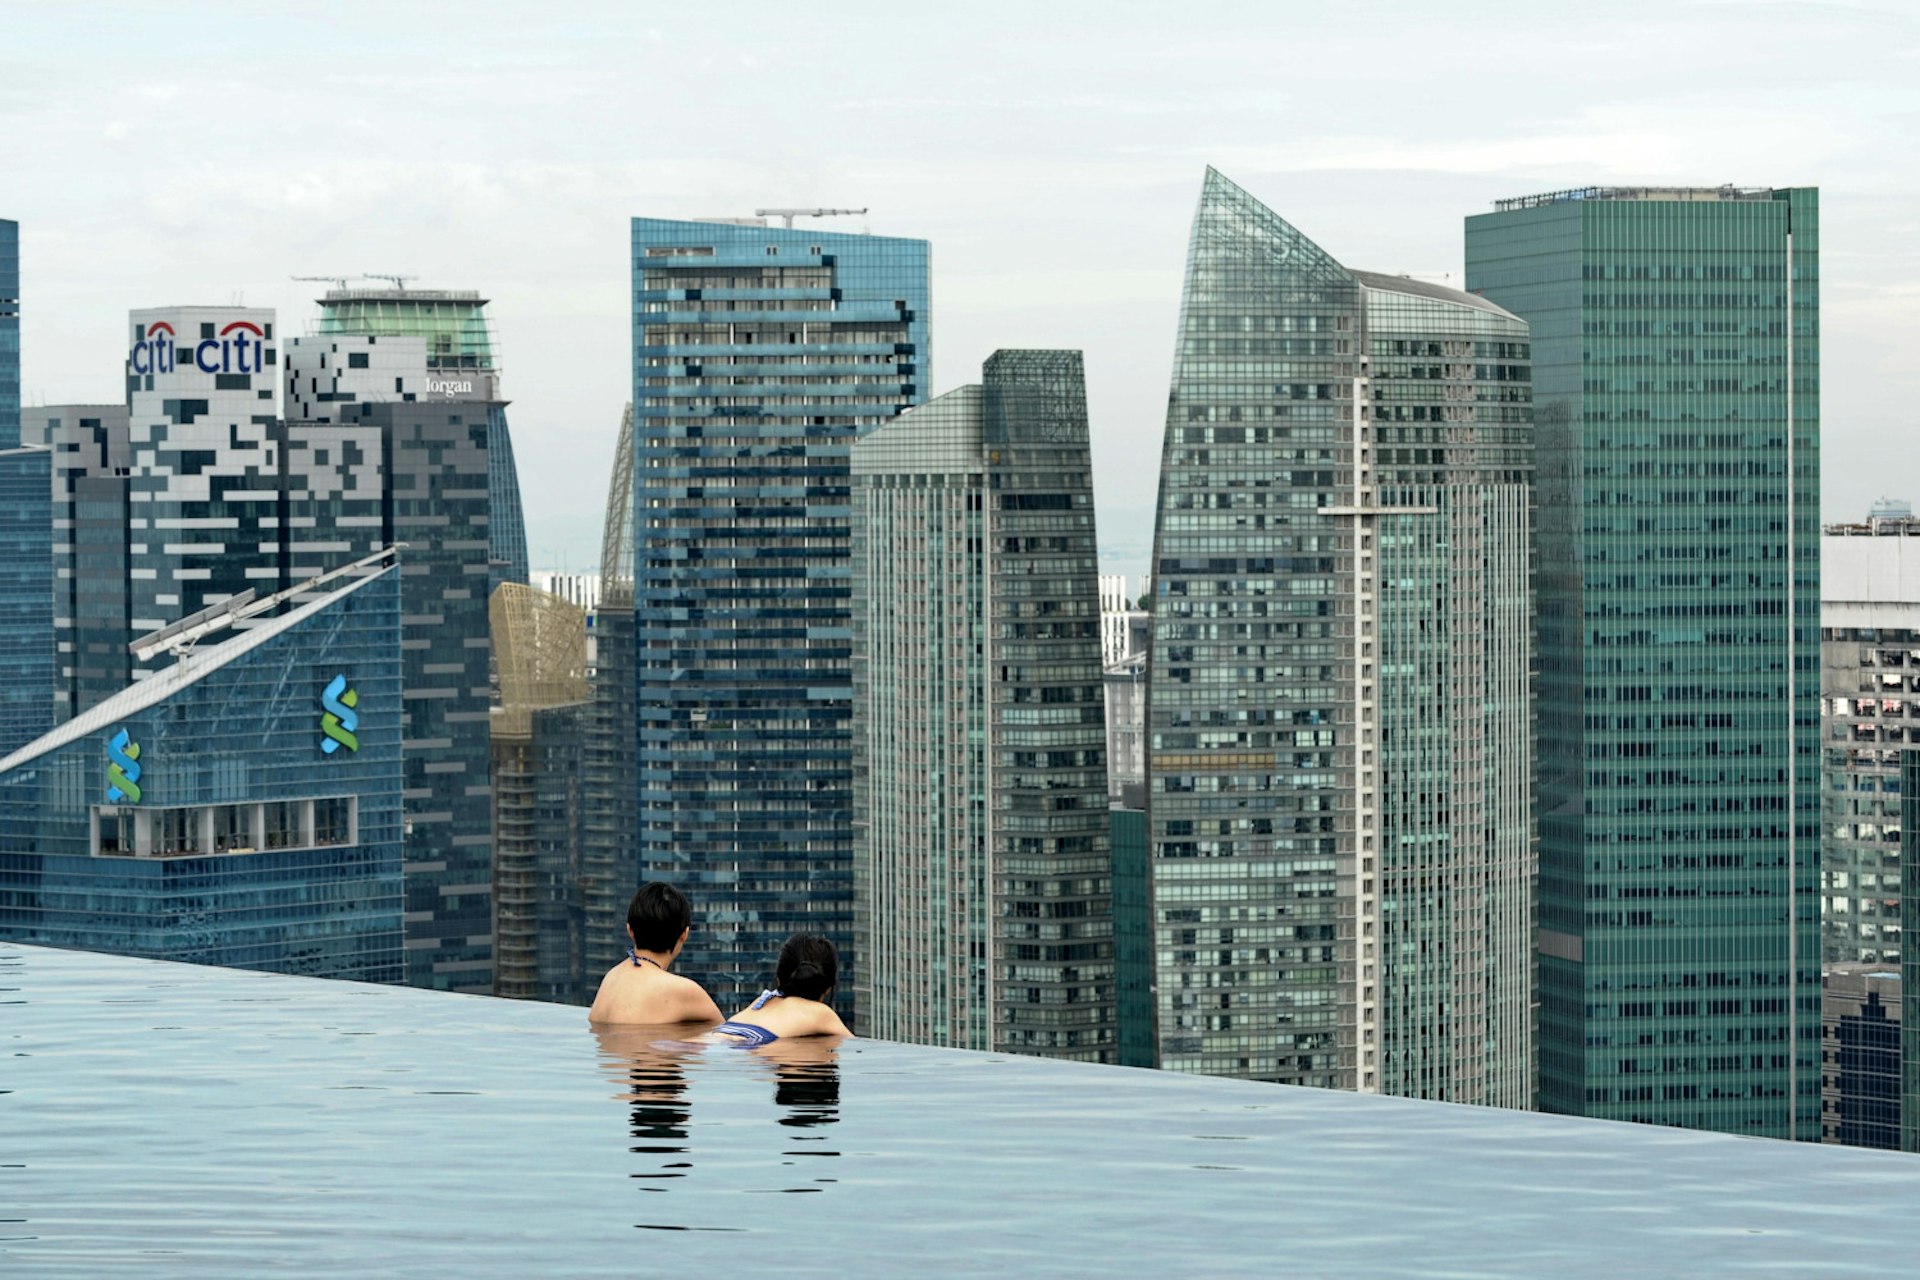 A couple in a rooftop pool looking out over a city skyscraper skyline.